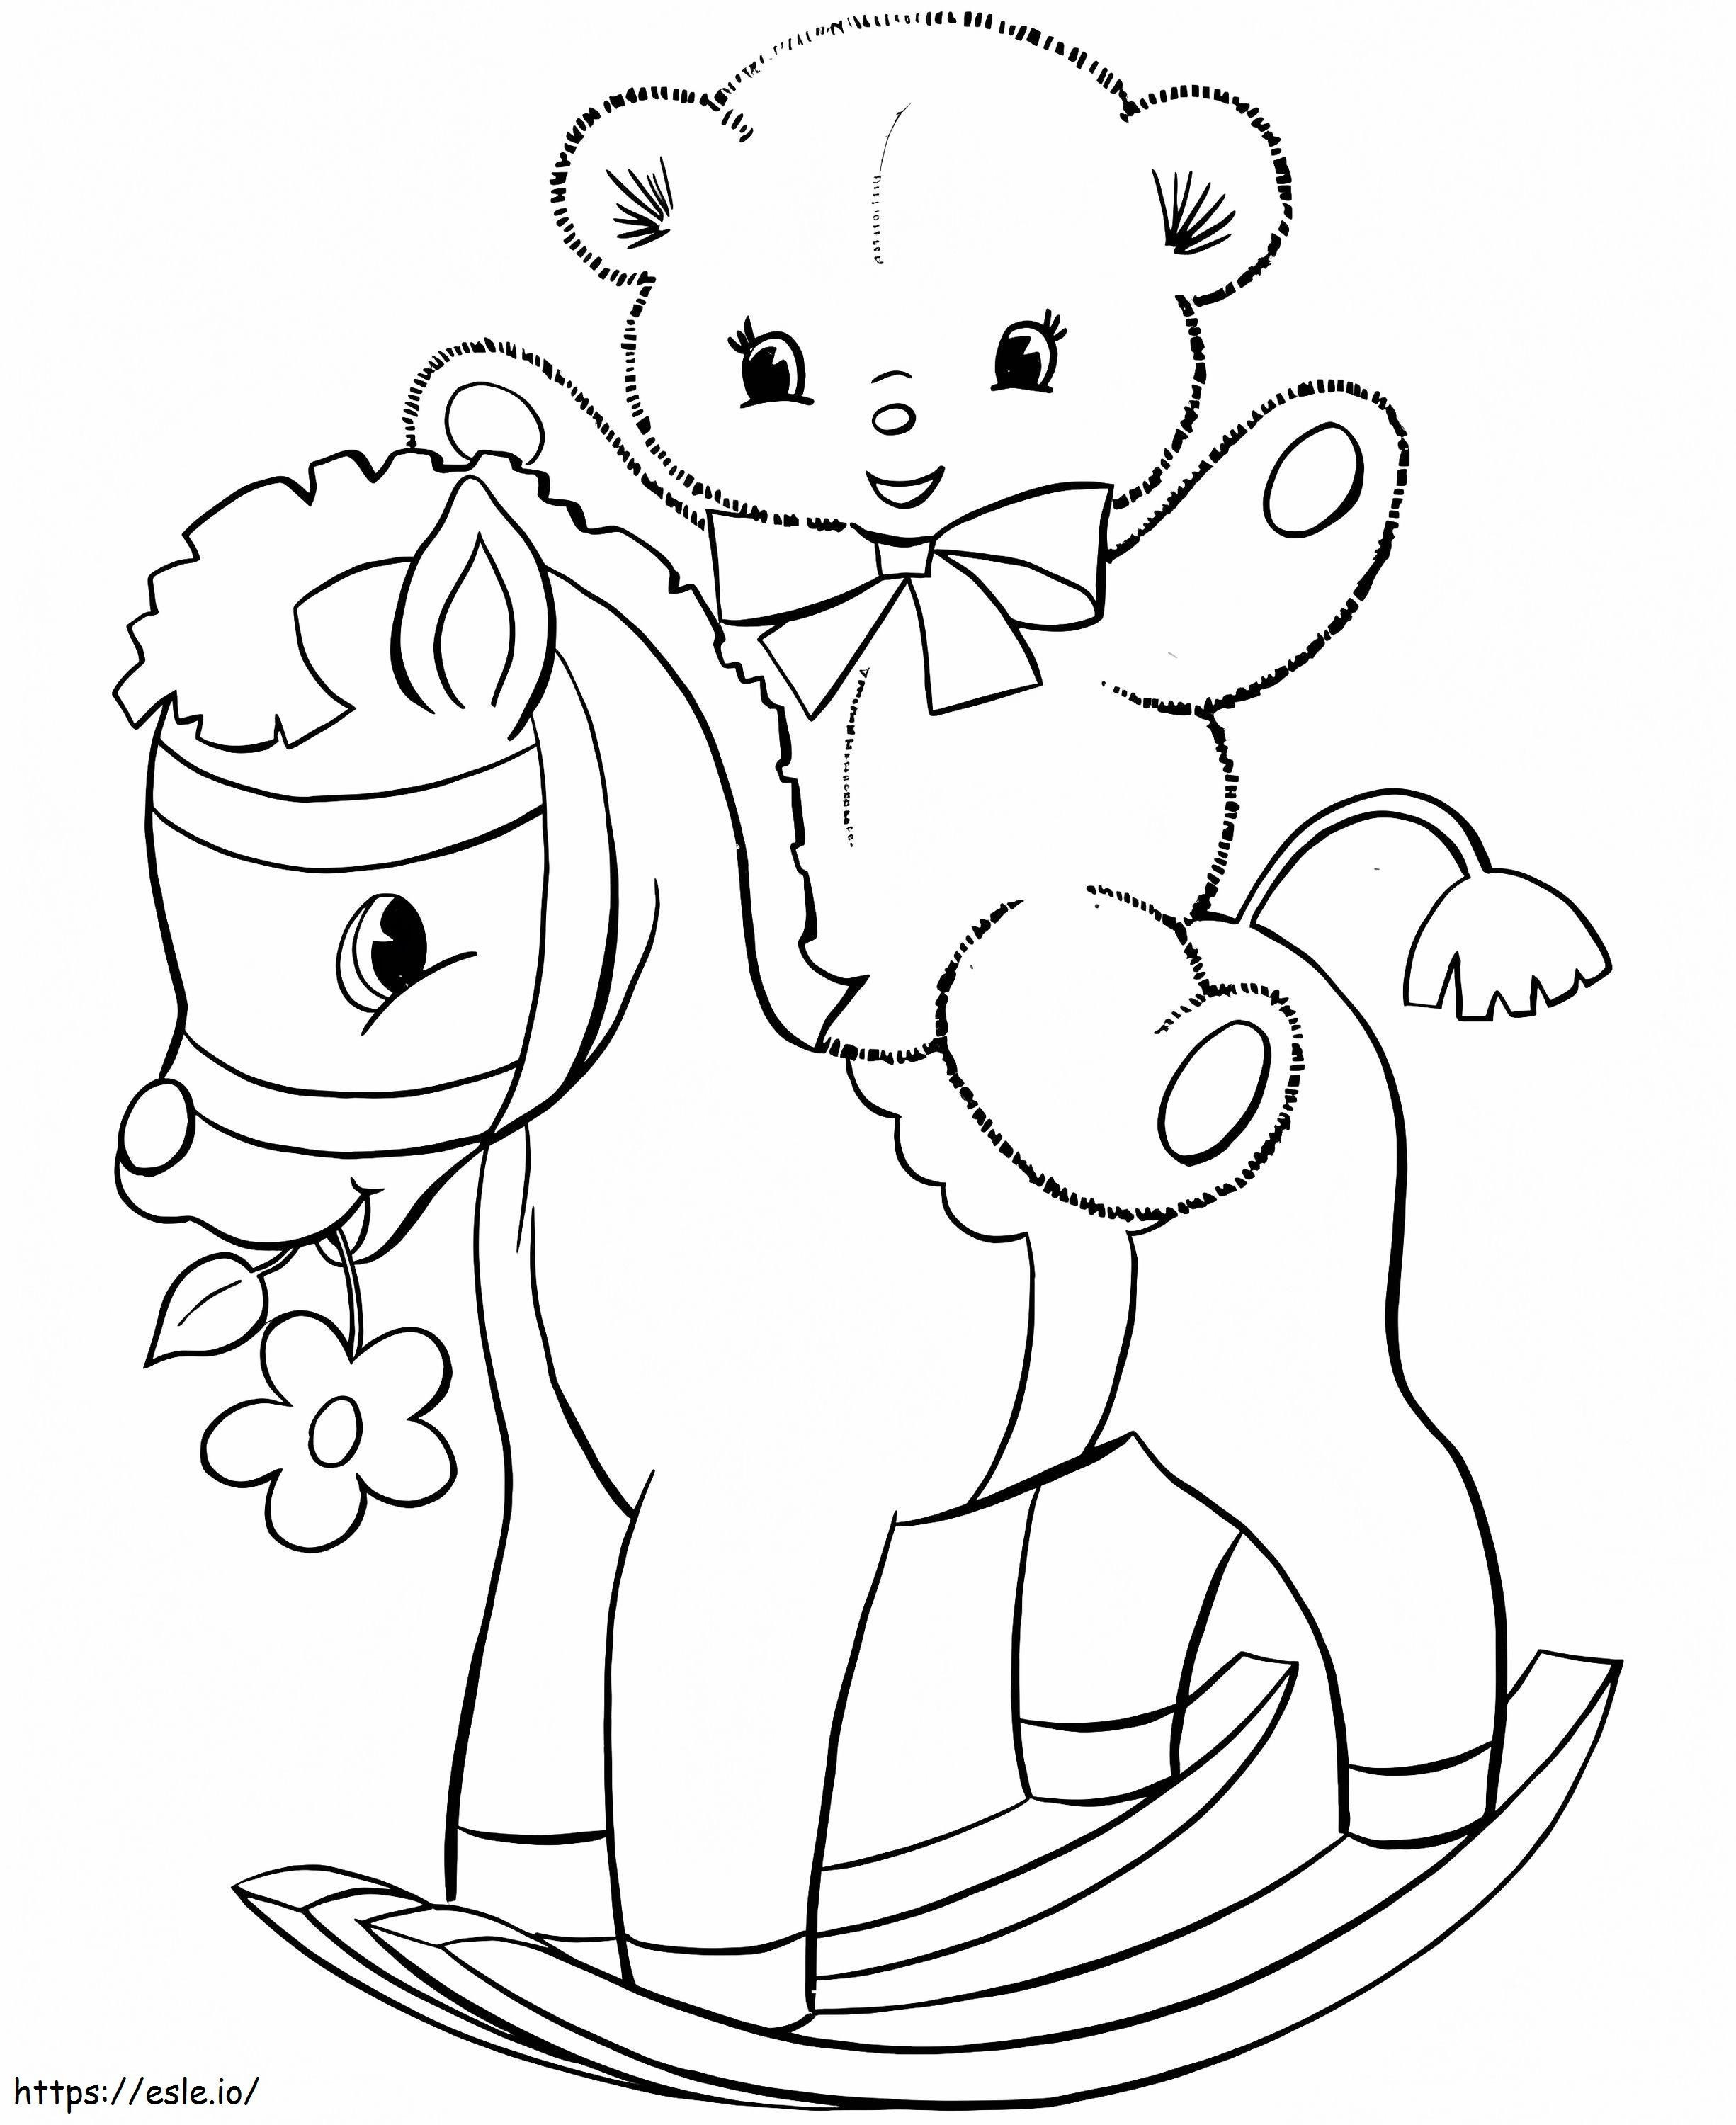 Rocking Horse And Teddy Bear coloring page